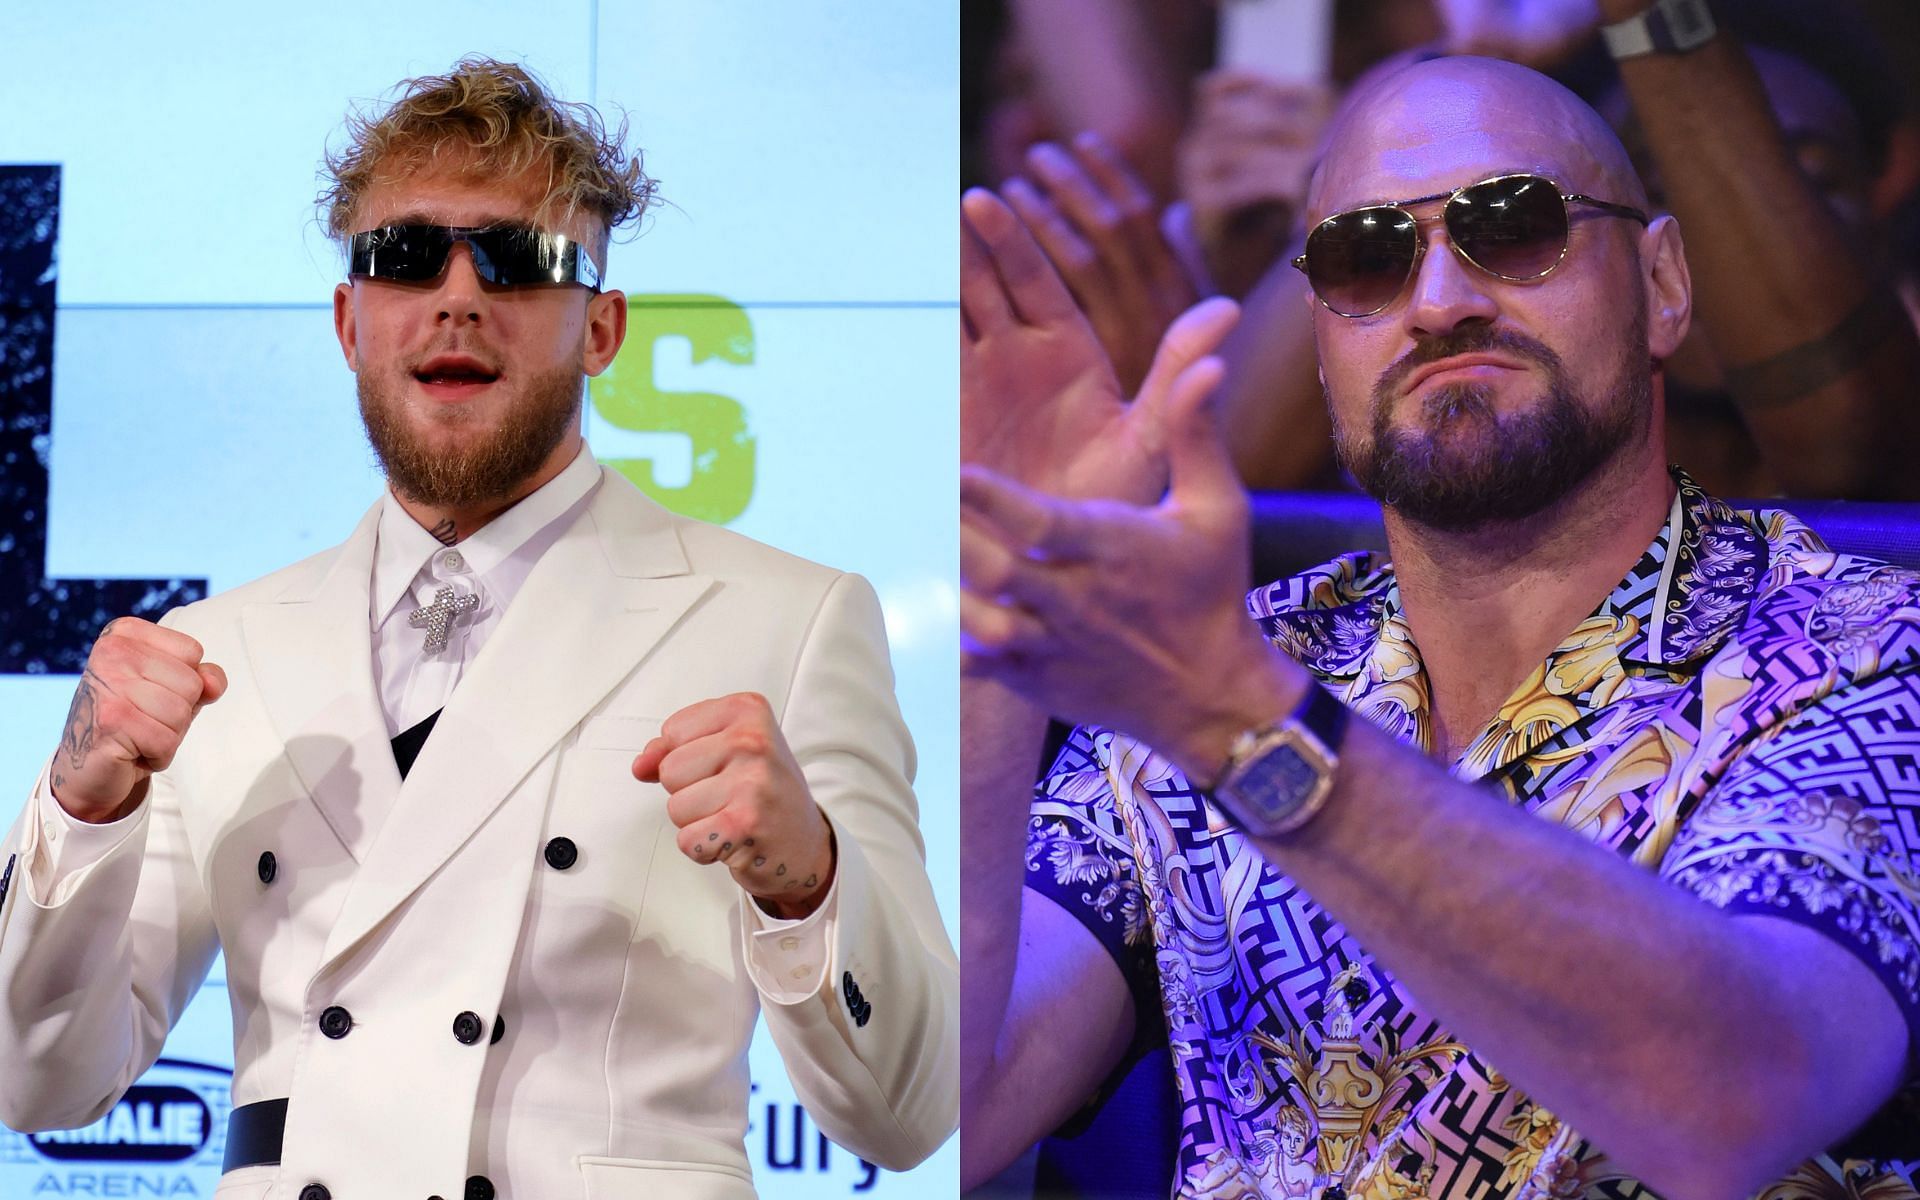 Jake Paul (left) and Tyson Fury (right) (Image credits Getty)